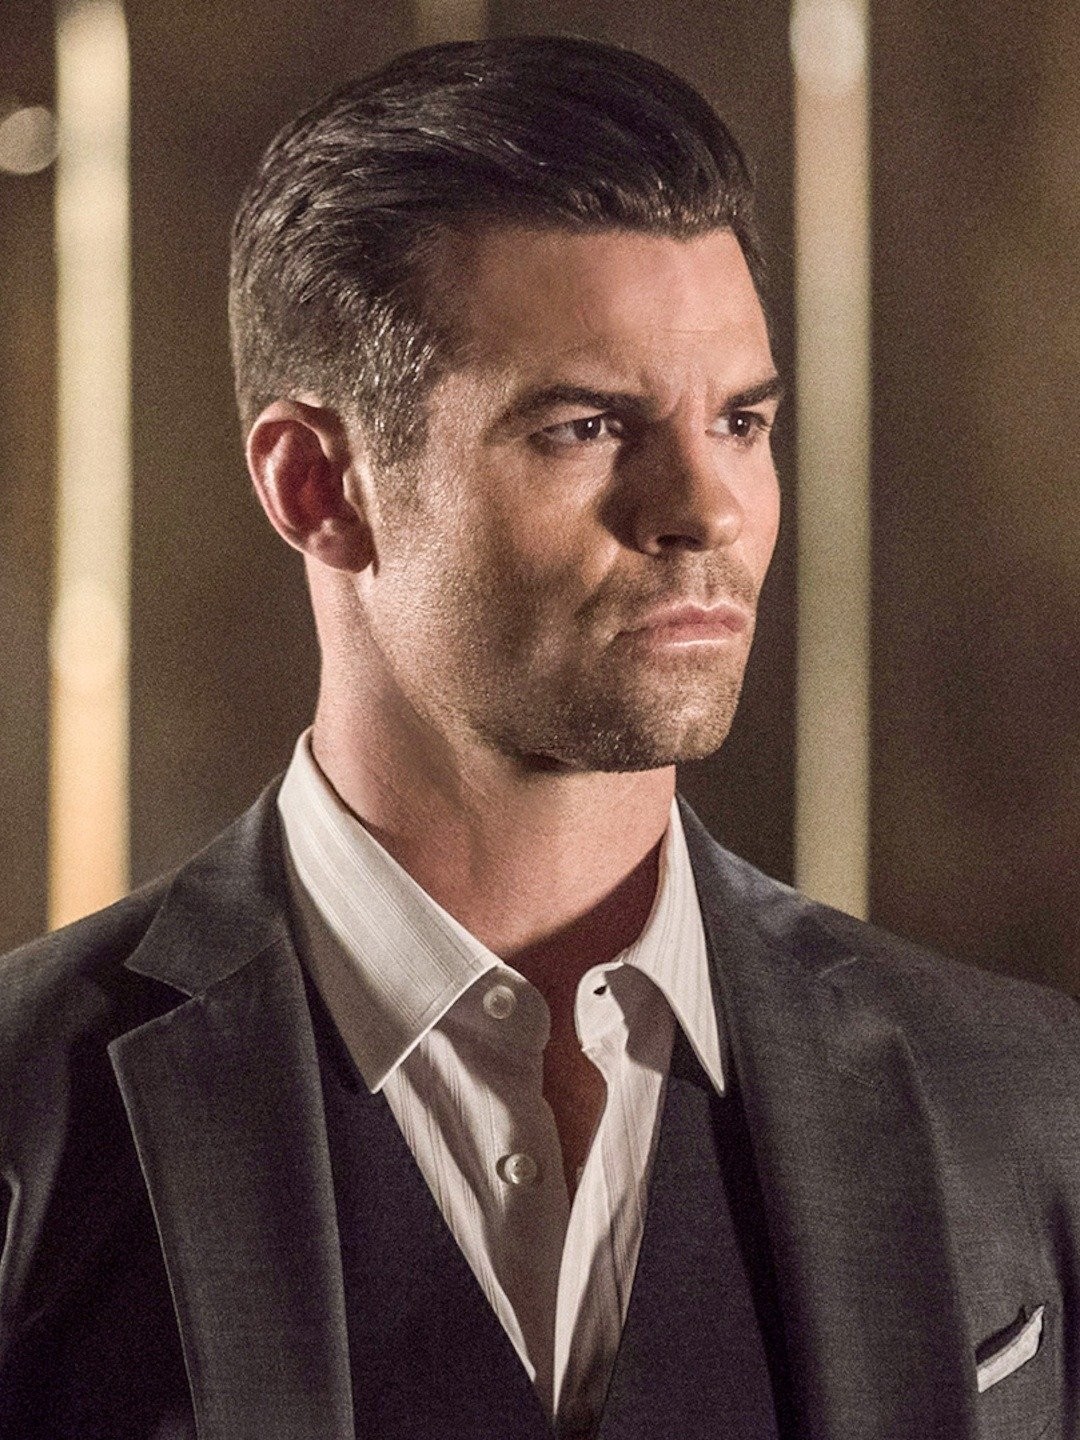 BEST CHARACTERS IN THE WORLD on Twitter Elijah Mikaelson from The  Originals httpstcoKF9Cxqi5xE  Twitter